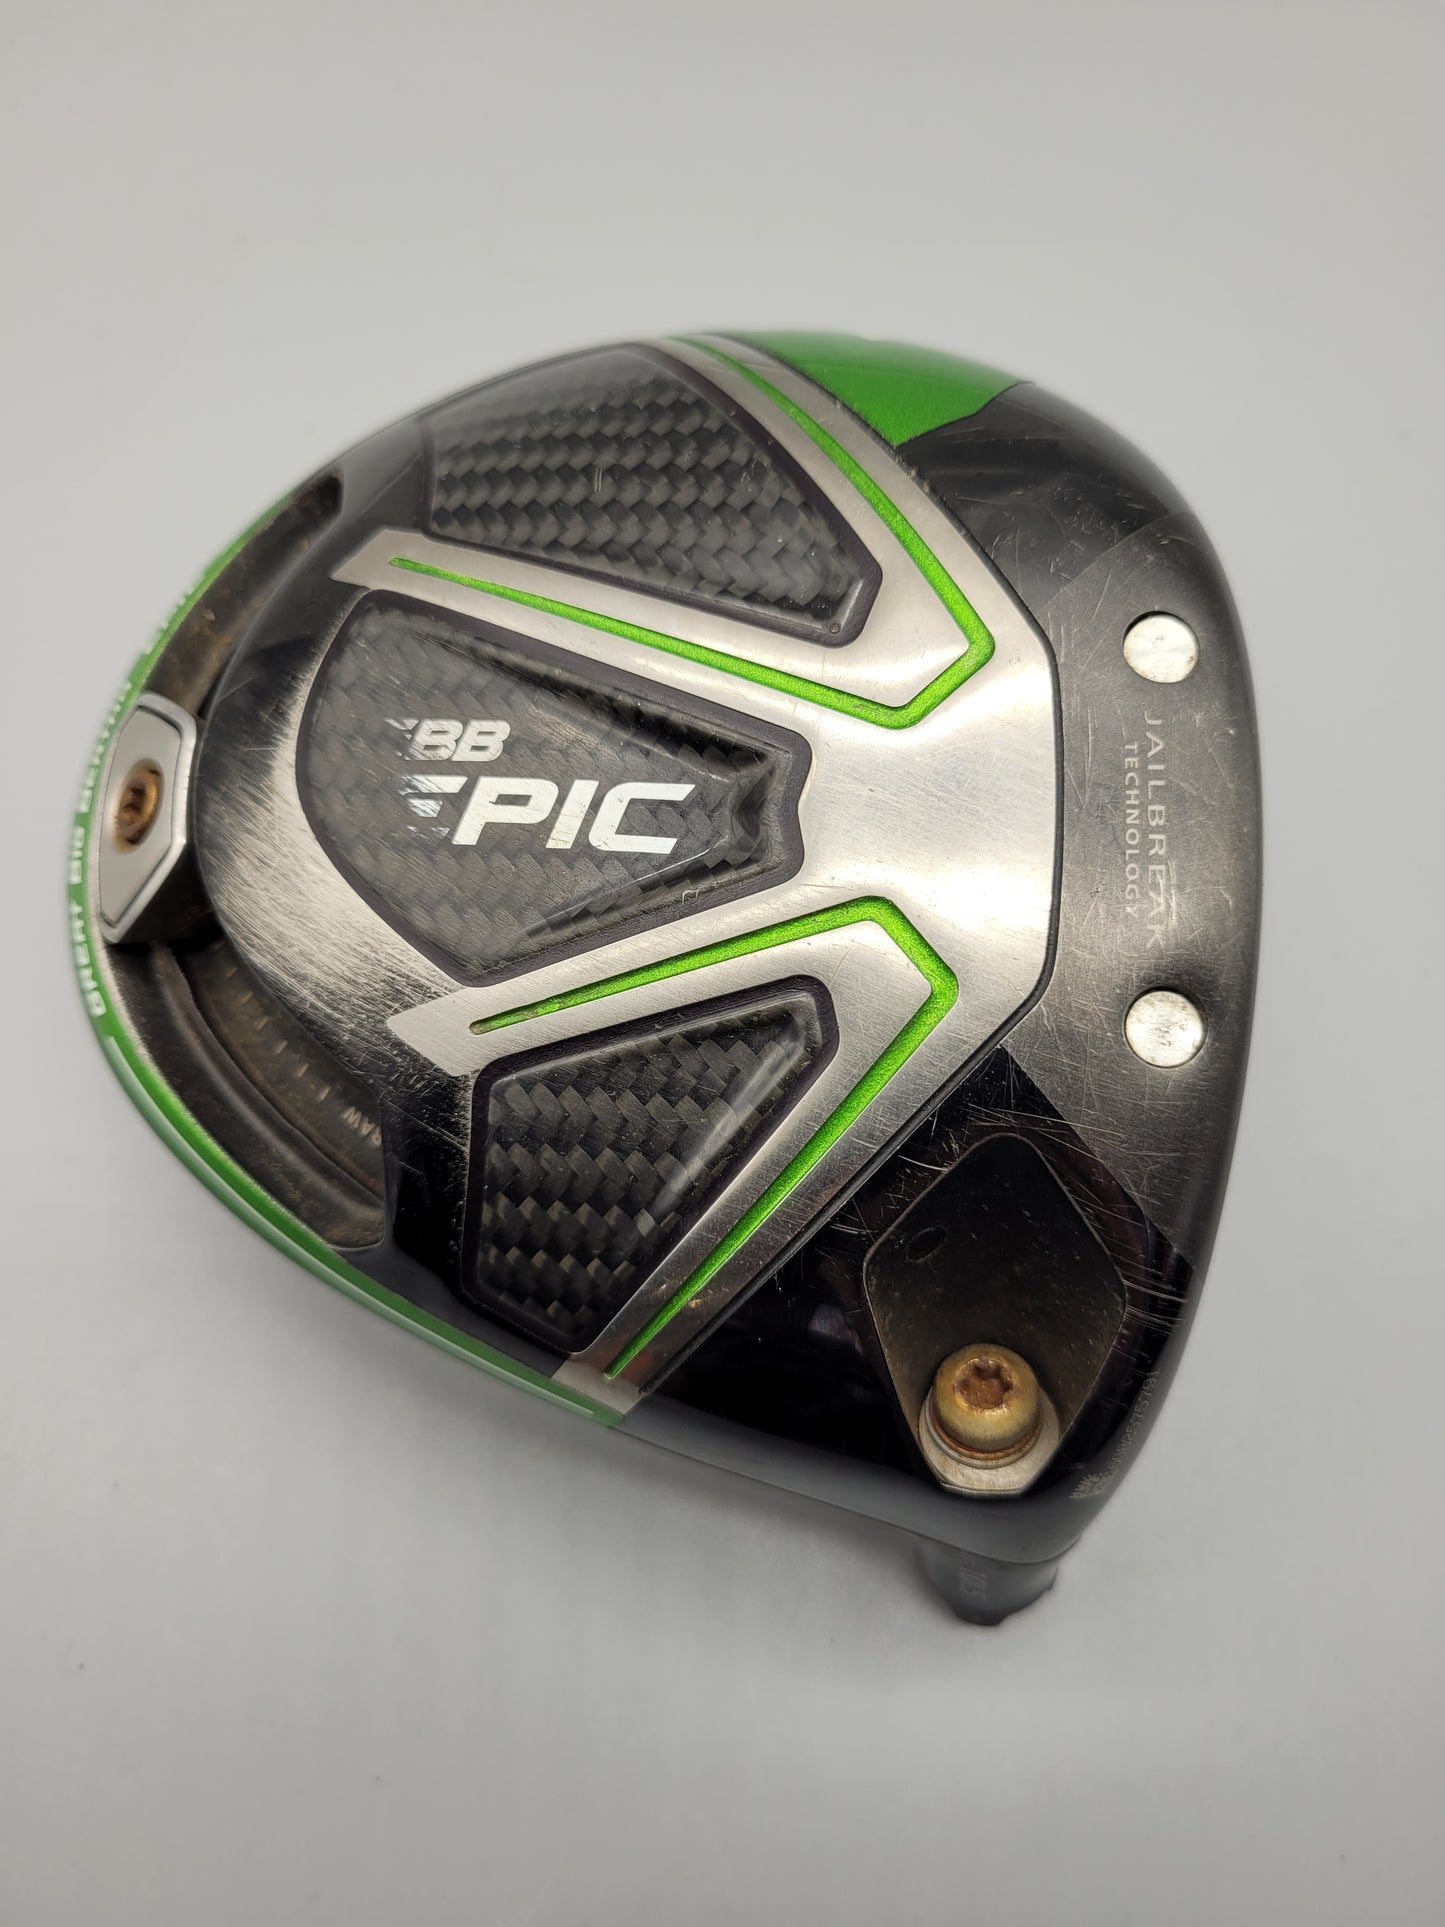 Callaway GBB Epic Driver 10.5 Rogue White Stiff Right Hand - USED